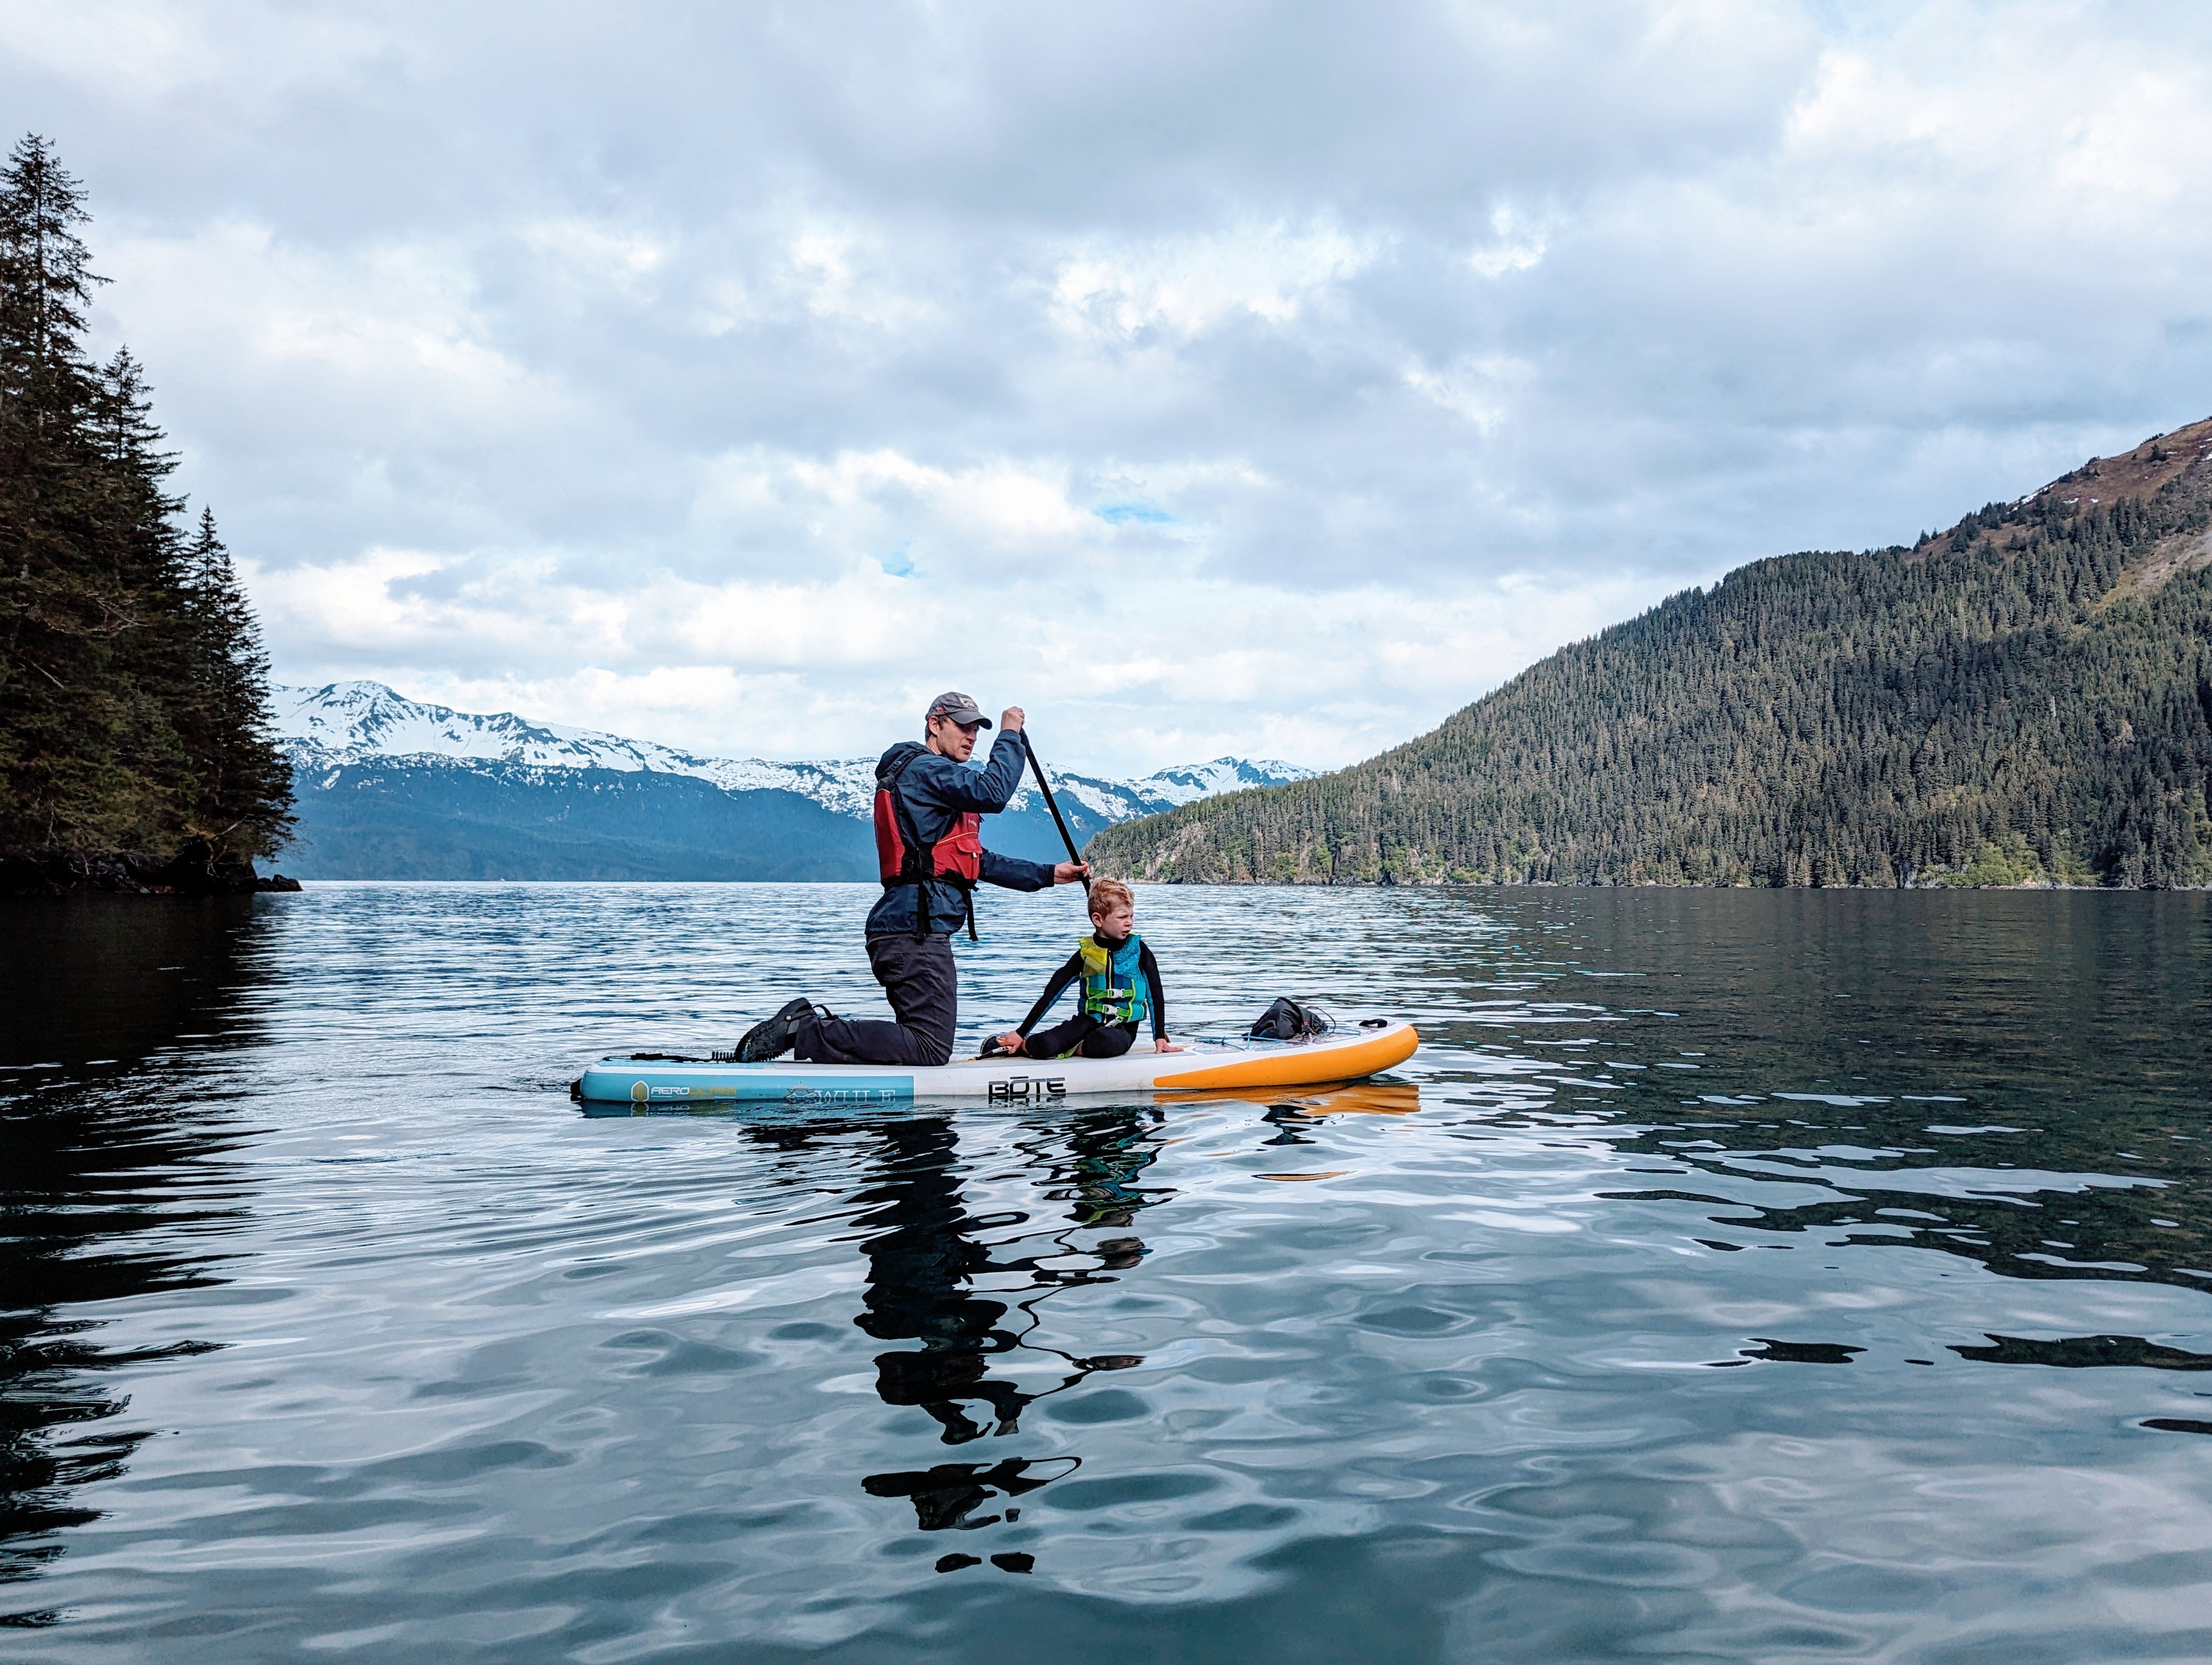 Father and young son Paddle Boarding wearing wet suits and life jackets